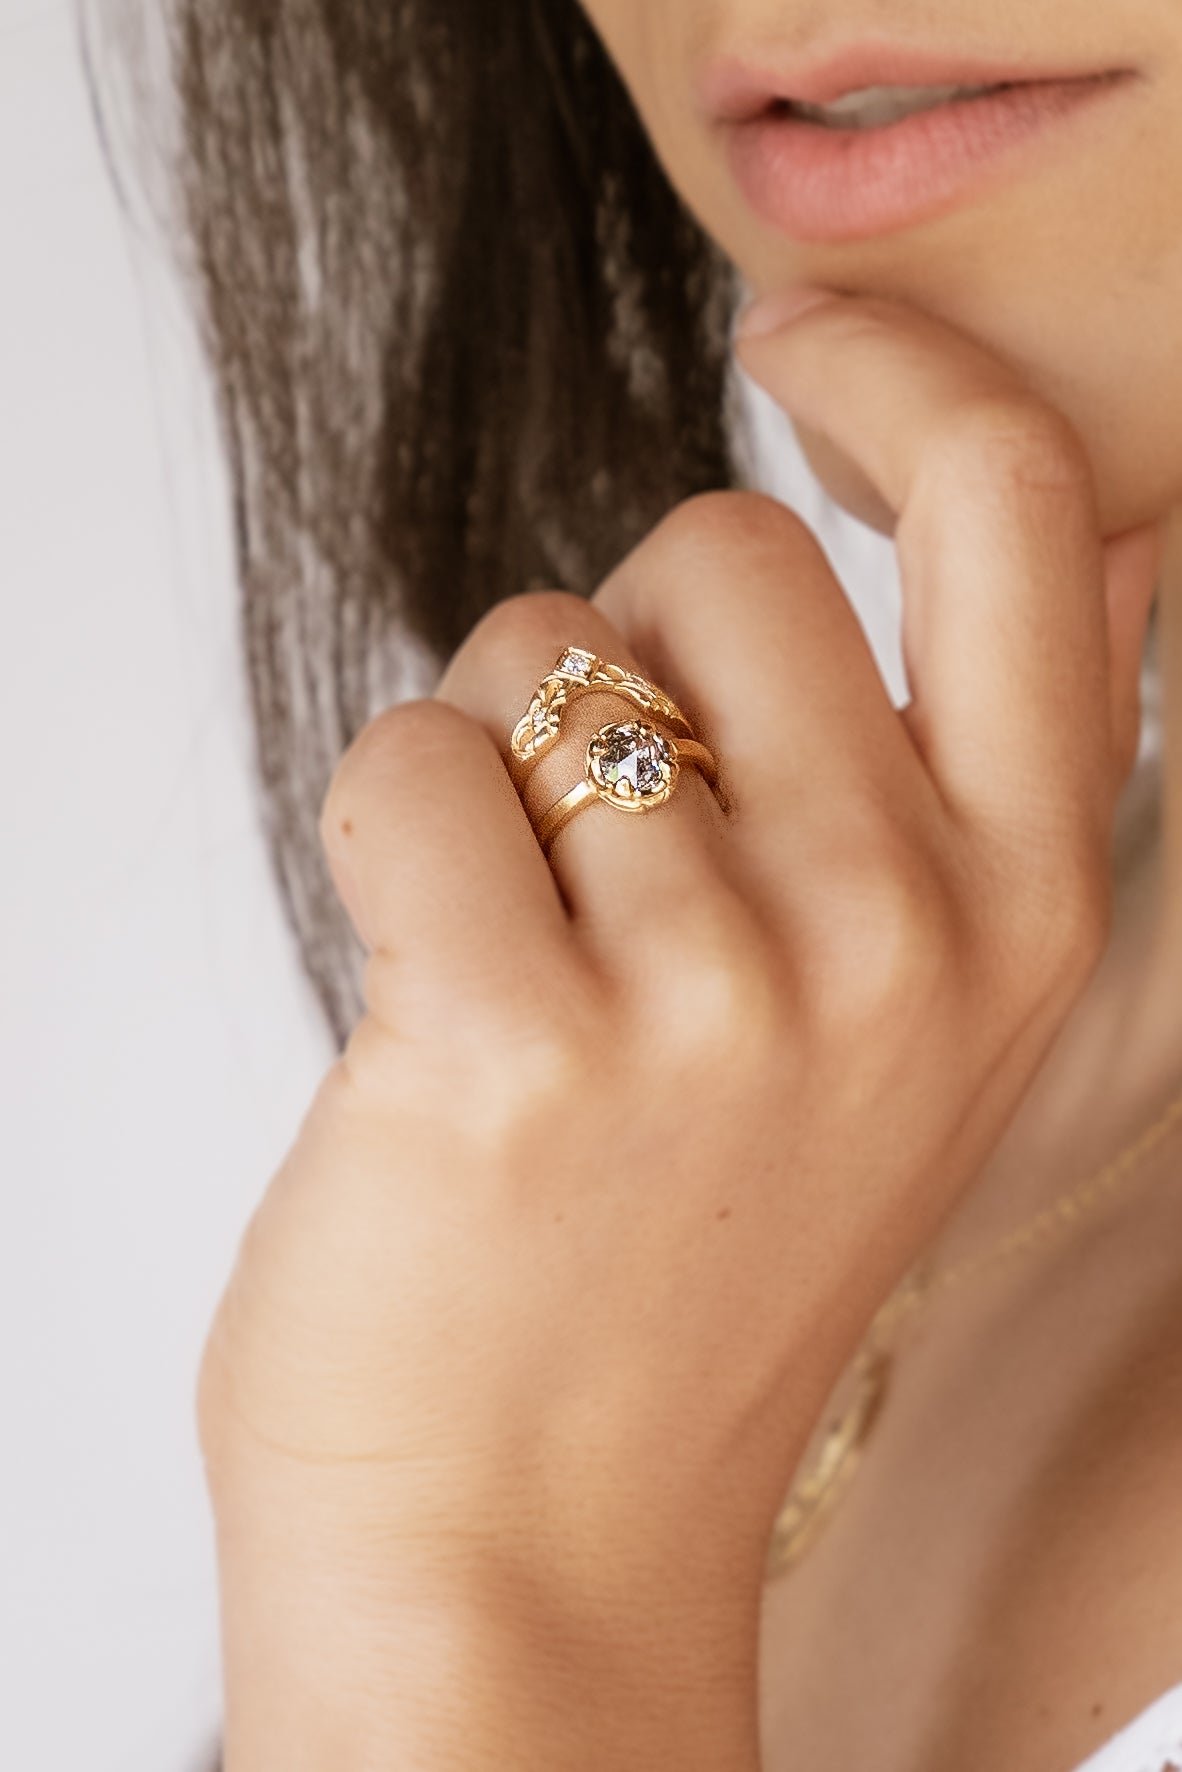 Named for Empress Josephine, this ring pairs perfectly with the Empress nesting band. Still stunning on its own, this ring features a rose cut diamond set securely within four prongs— a minimalist setting that marries a modern aesthetic with echoes of the past. 